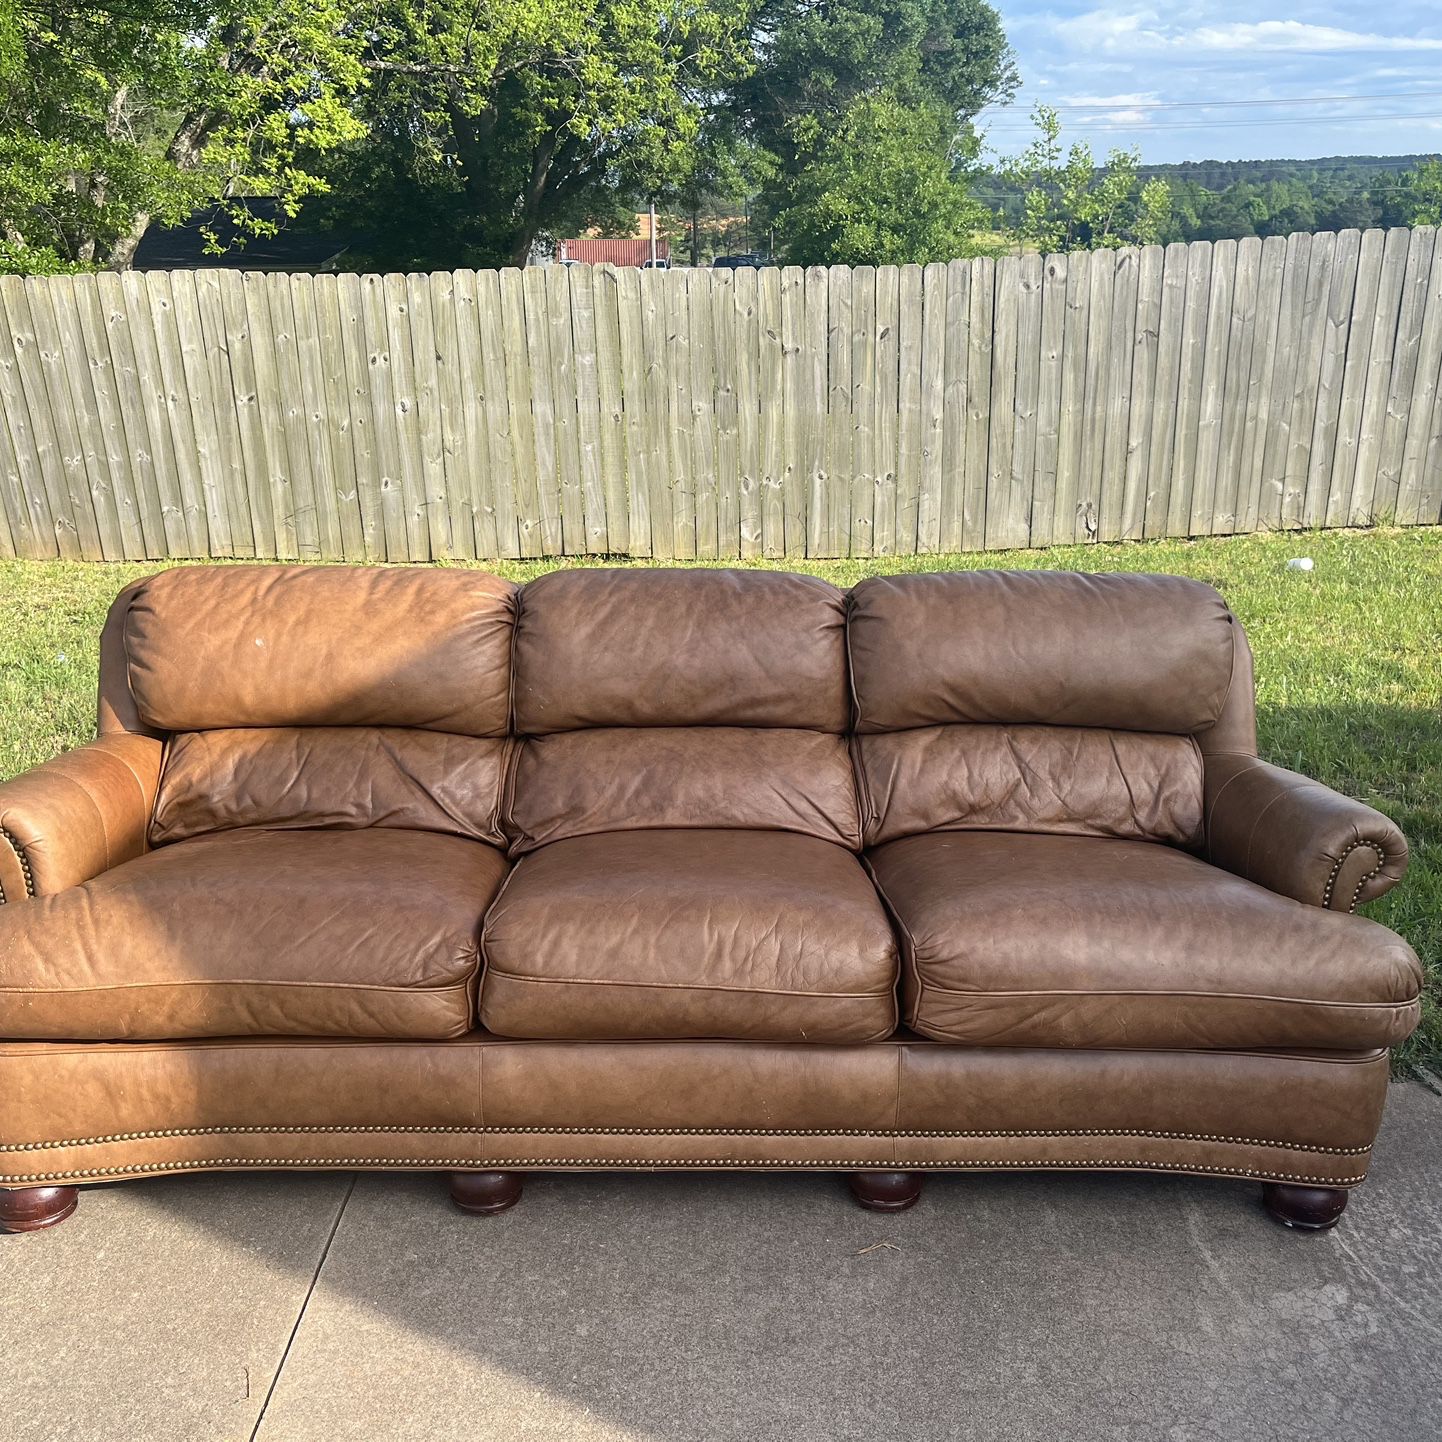 Free Ethan Allen Leather Couch